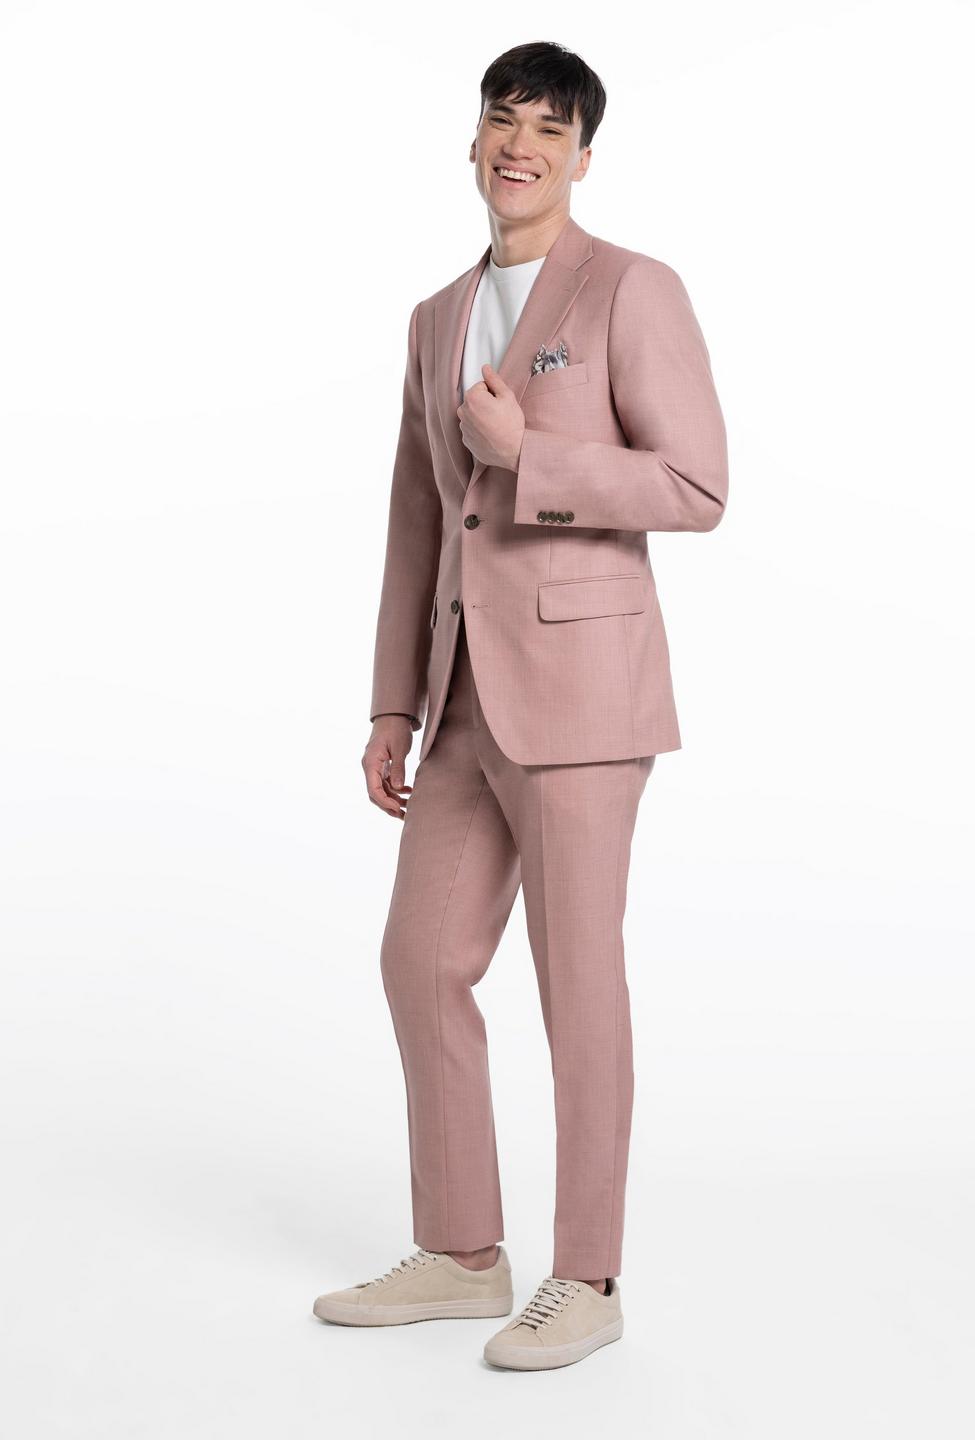 Pink suit - Solid Design from Seasonal Indochino Collection